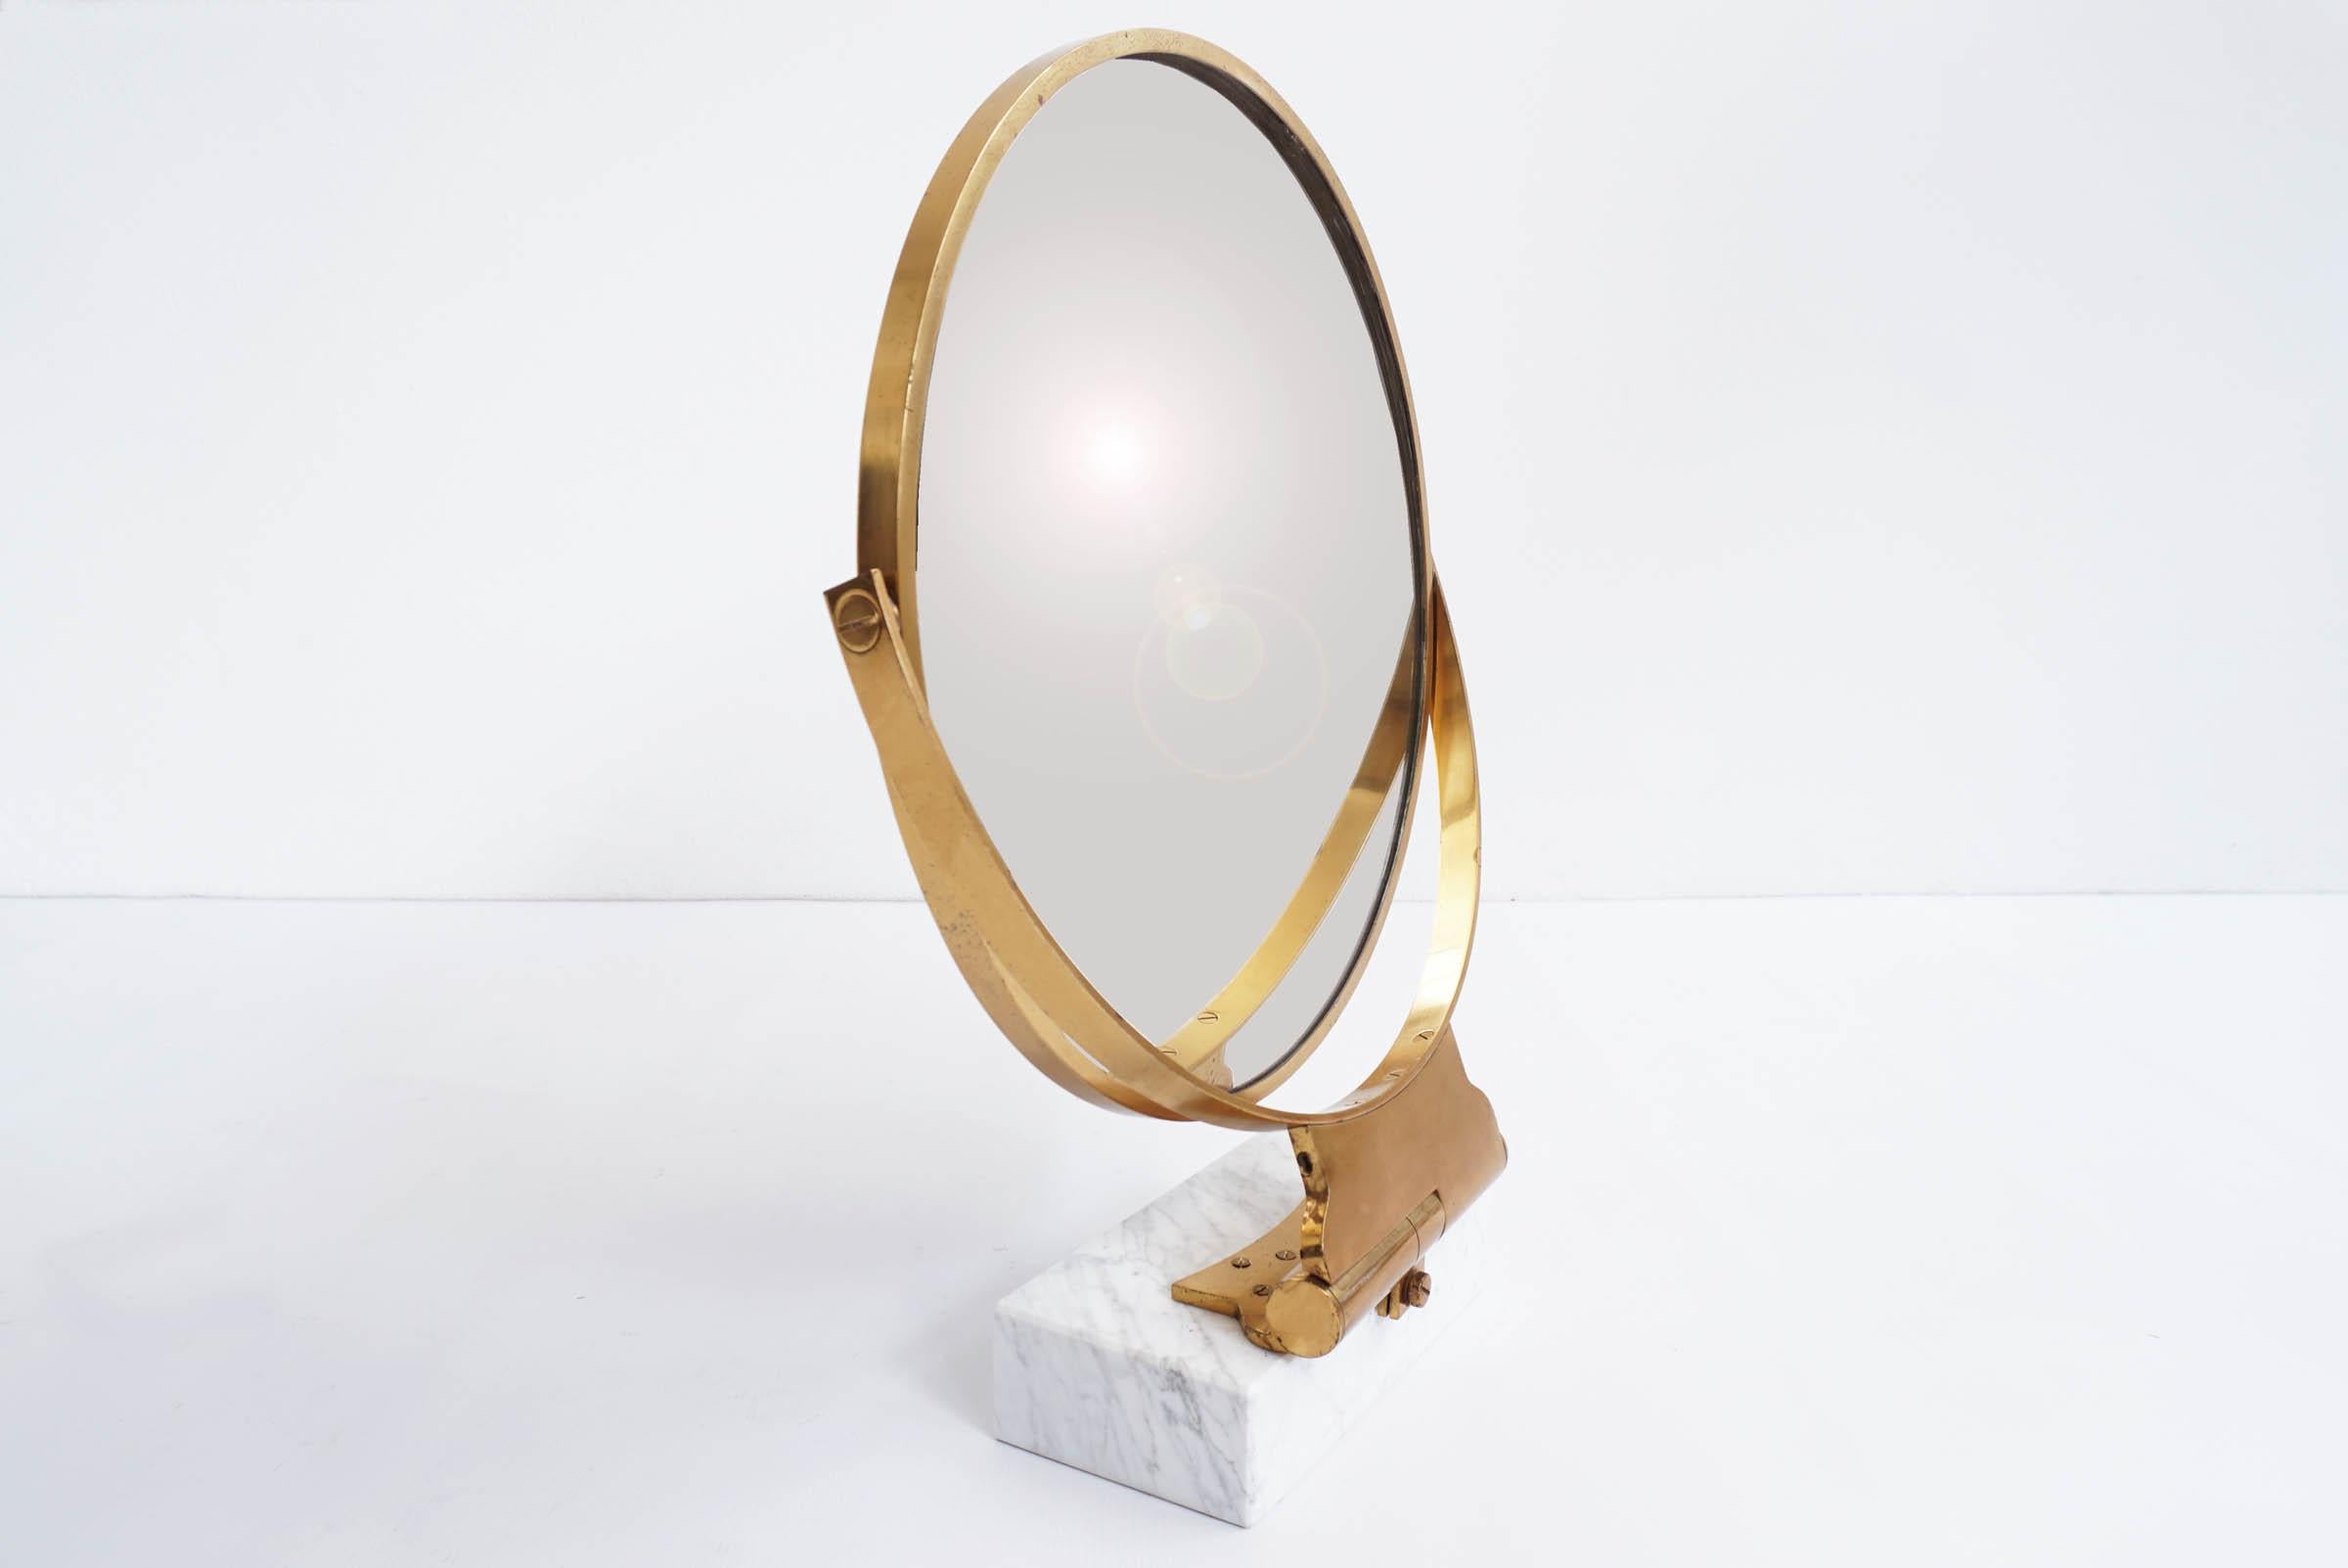 It is possible to adjust the inclination of this table mirror through the two elegant joints.